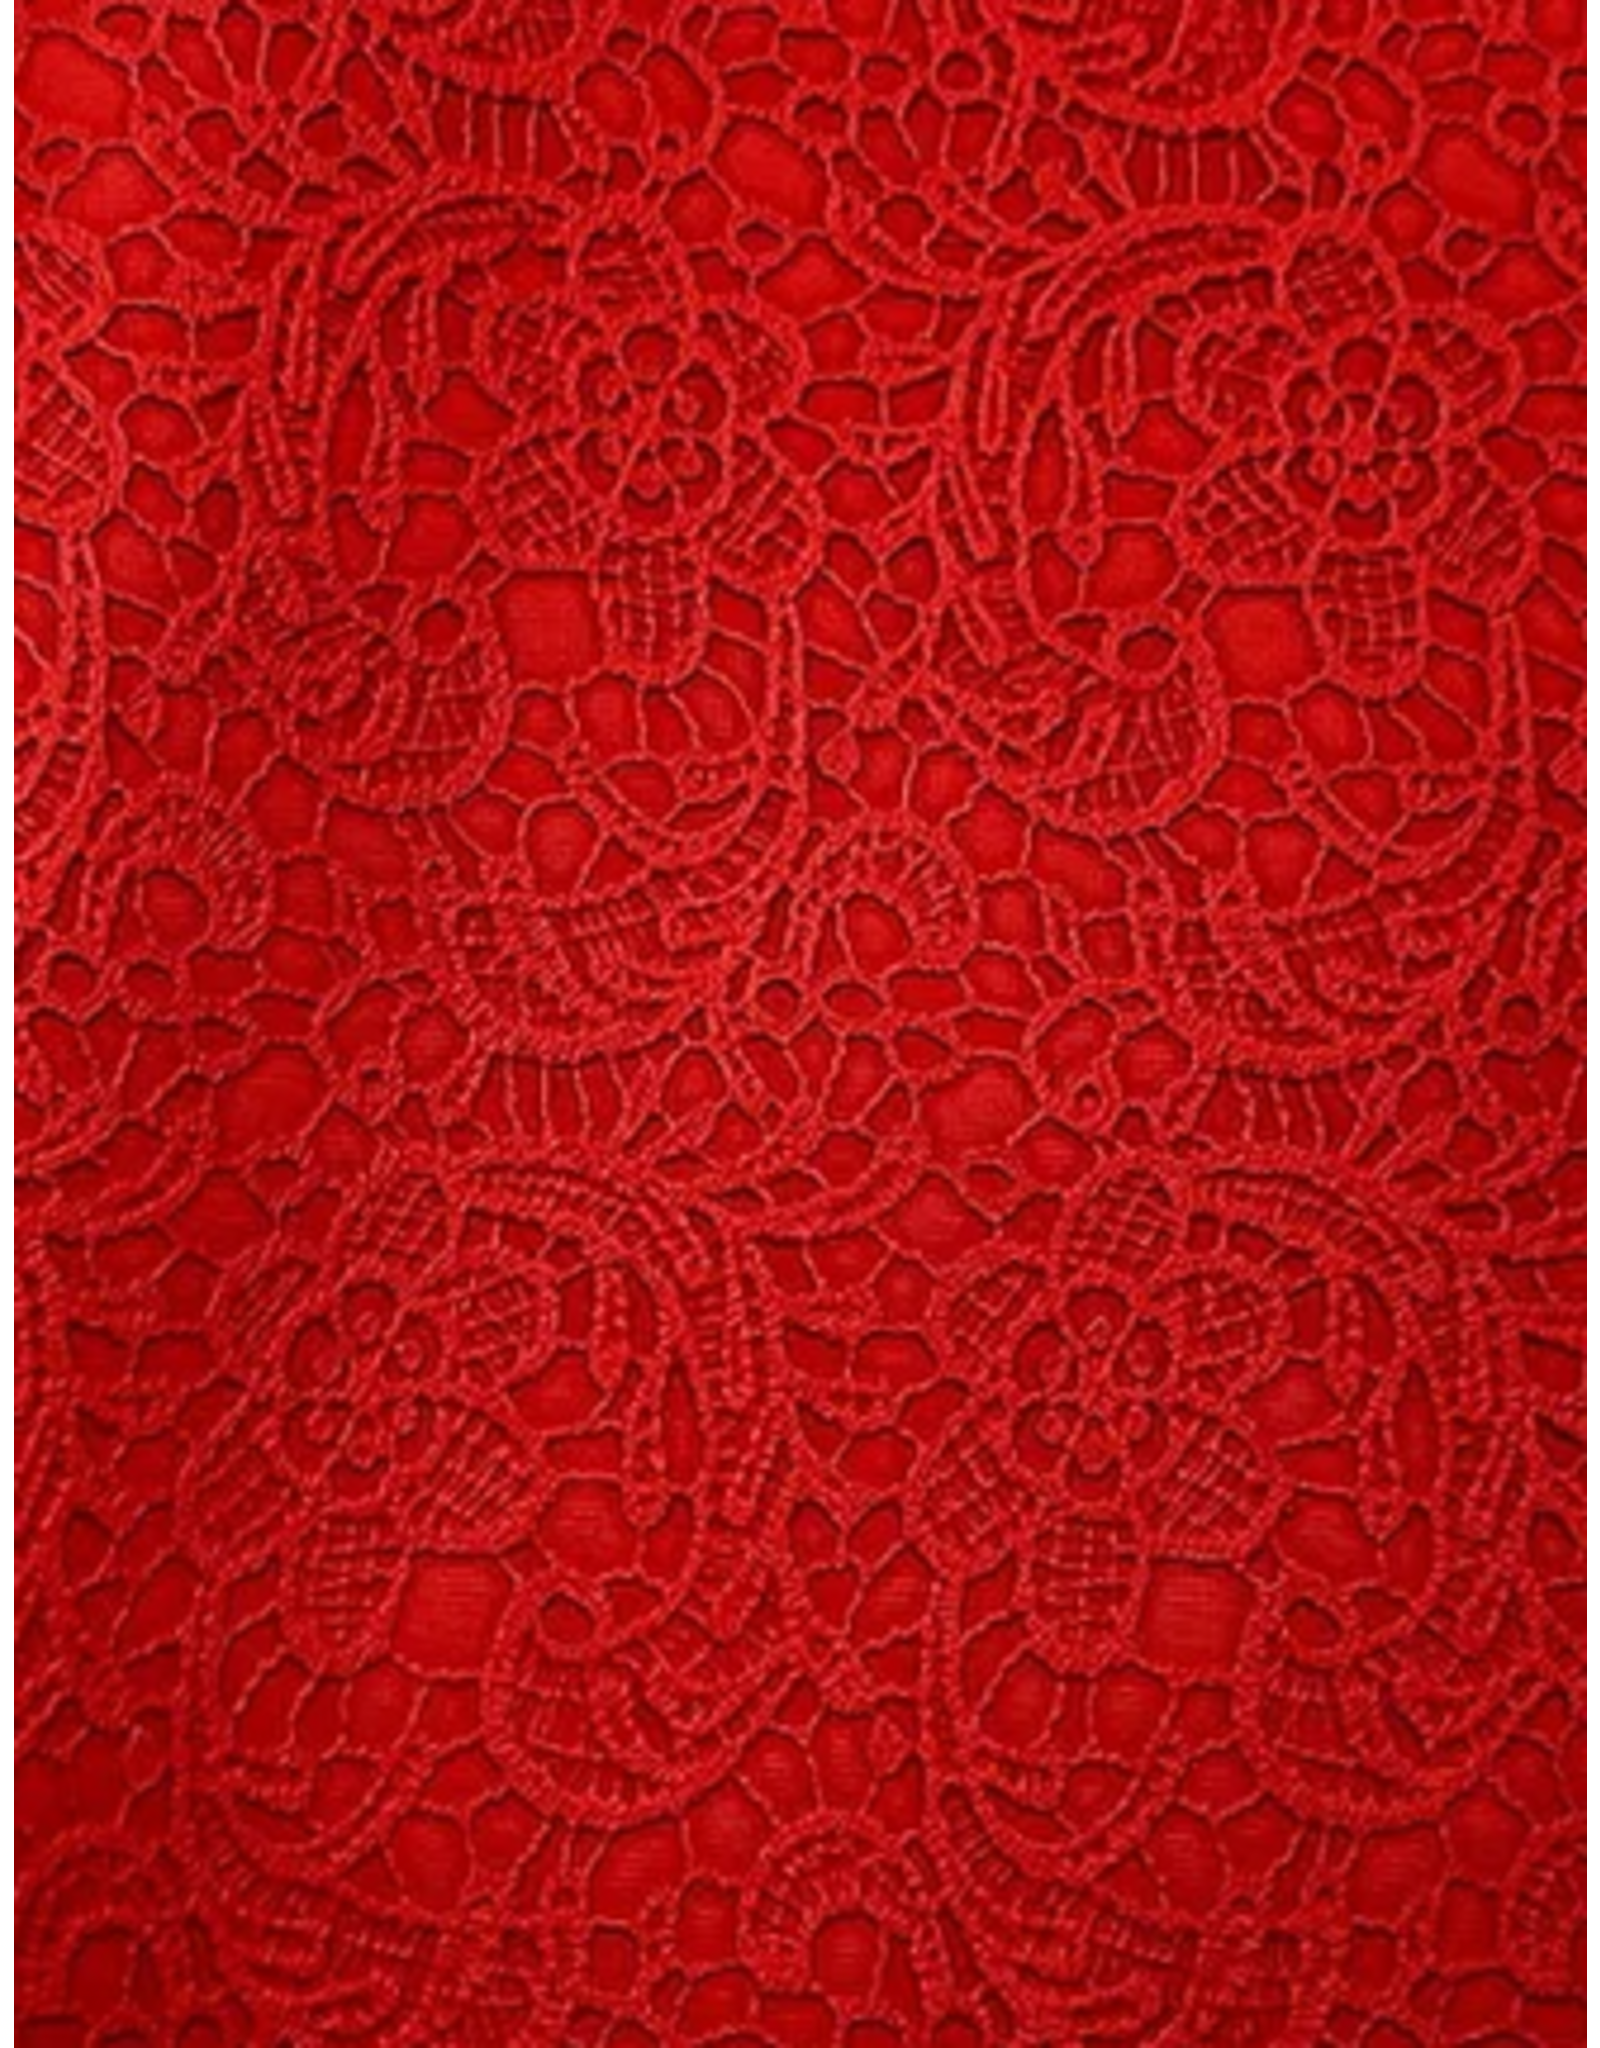 Faux Leather Beading Backing Red Lace Floral   .8mm thick 8x11"